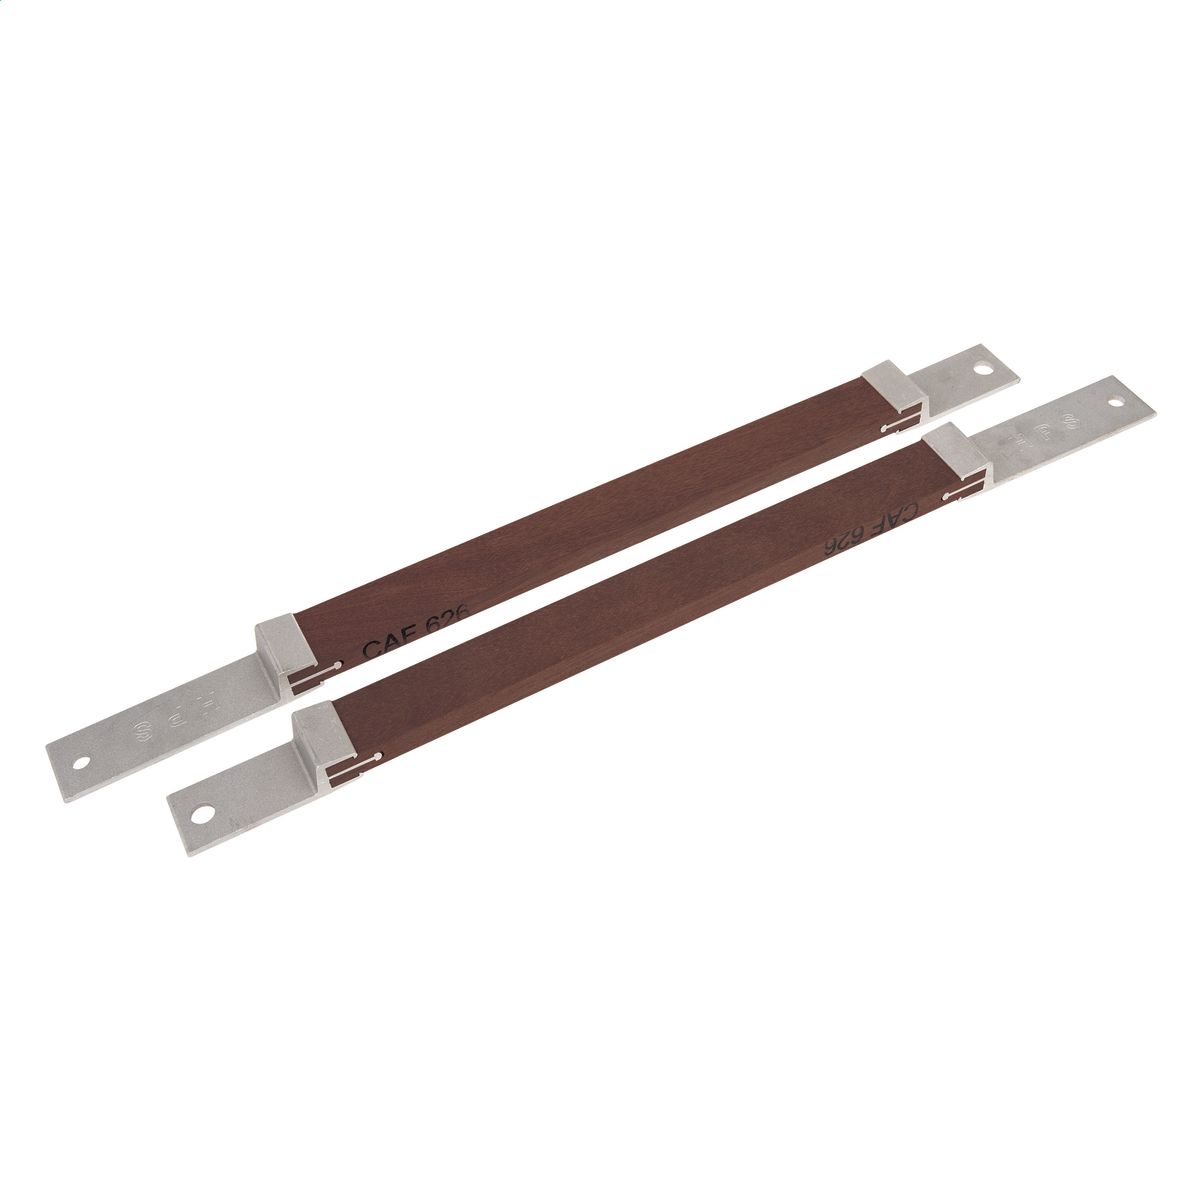 APITONG WOOD CROSSARM BRACE, 13/16in x 1-3/4in PROFILE, 26in LENGTH, 38 SPAN  x 18in DROP, SOLD AS PAIR, PSCAF626